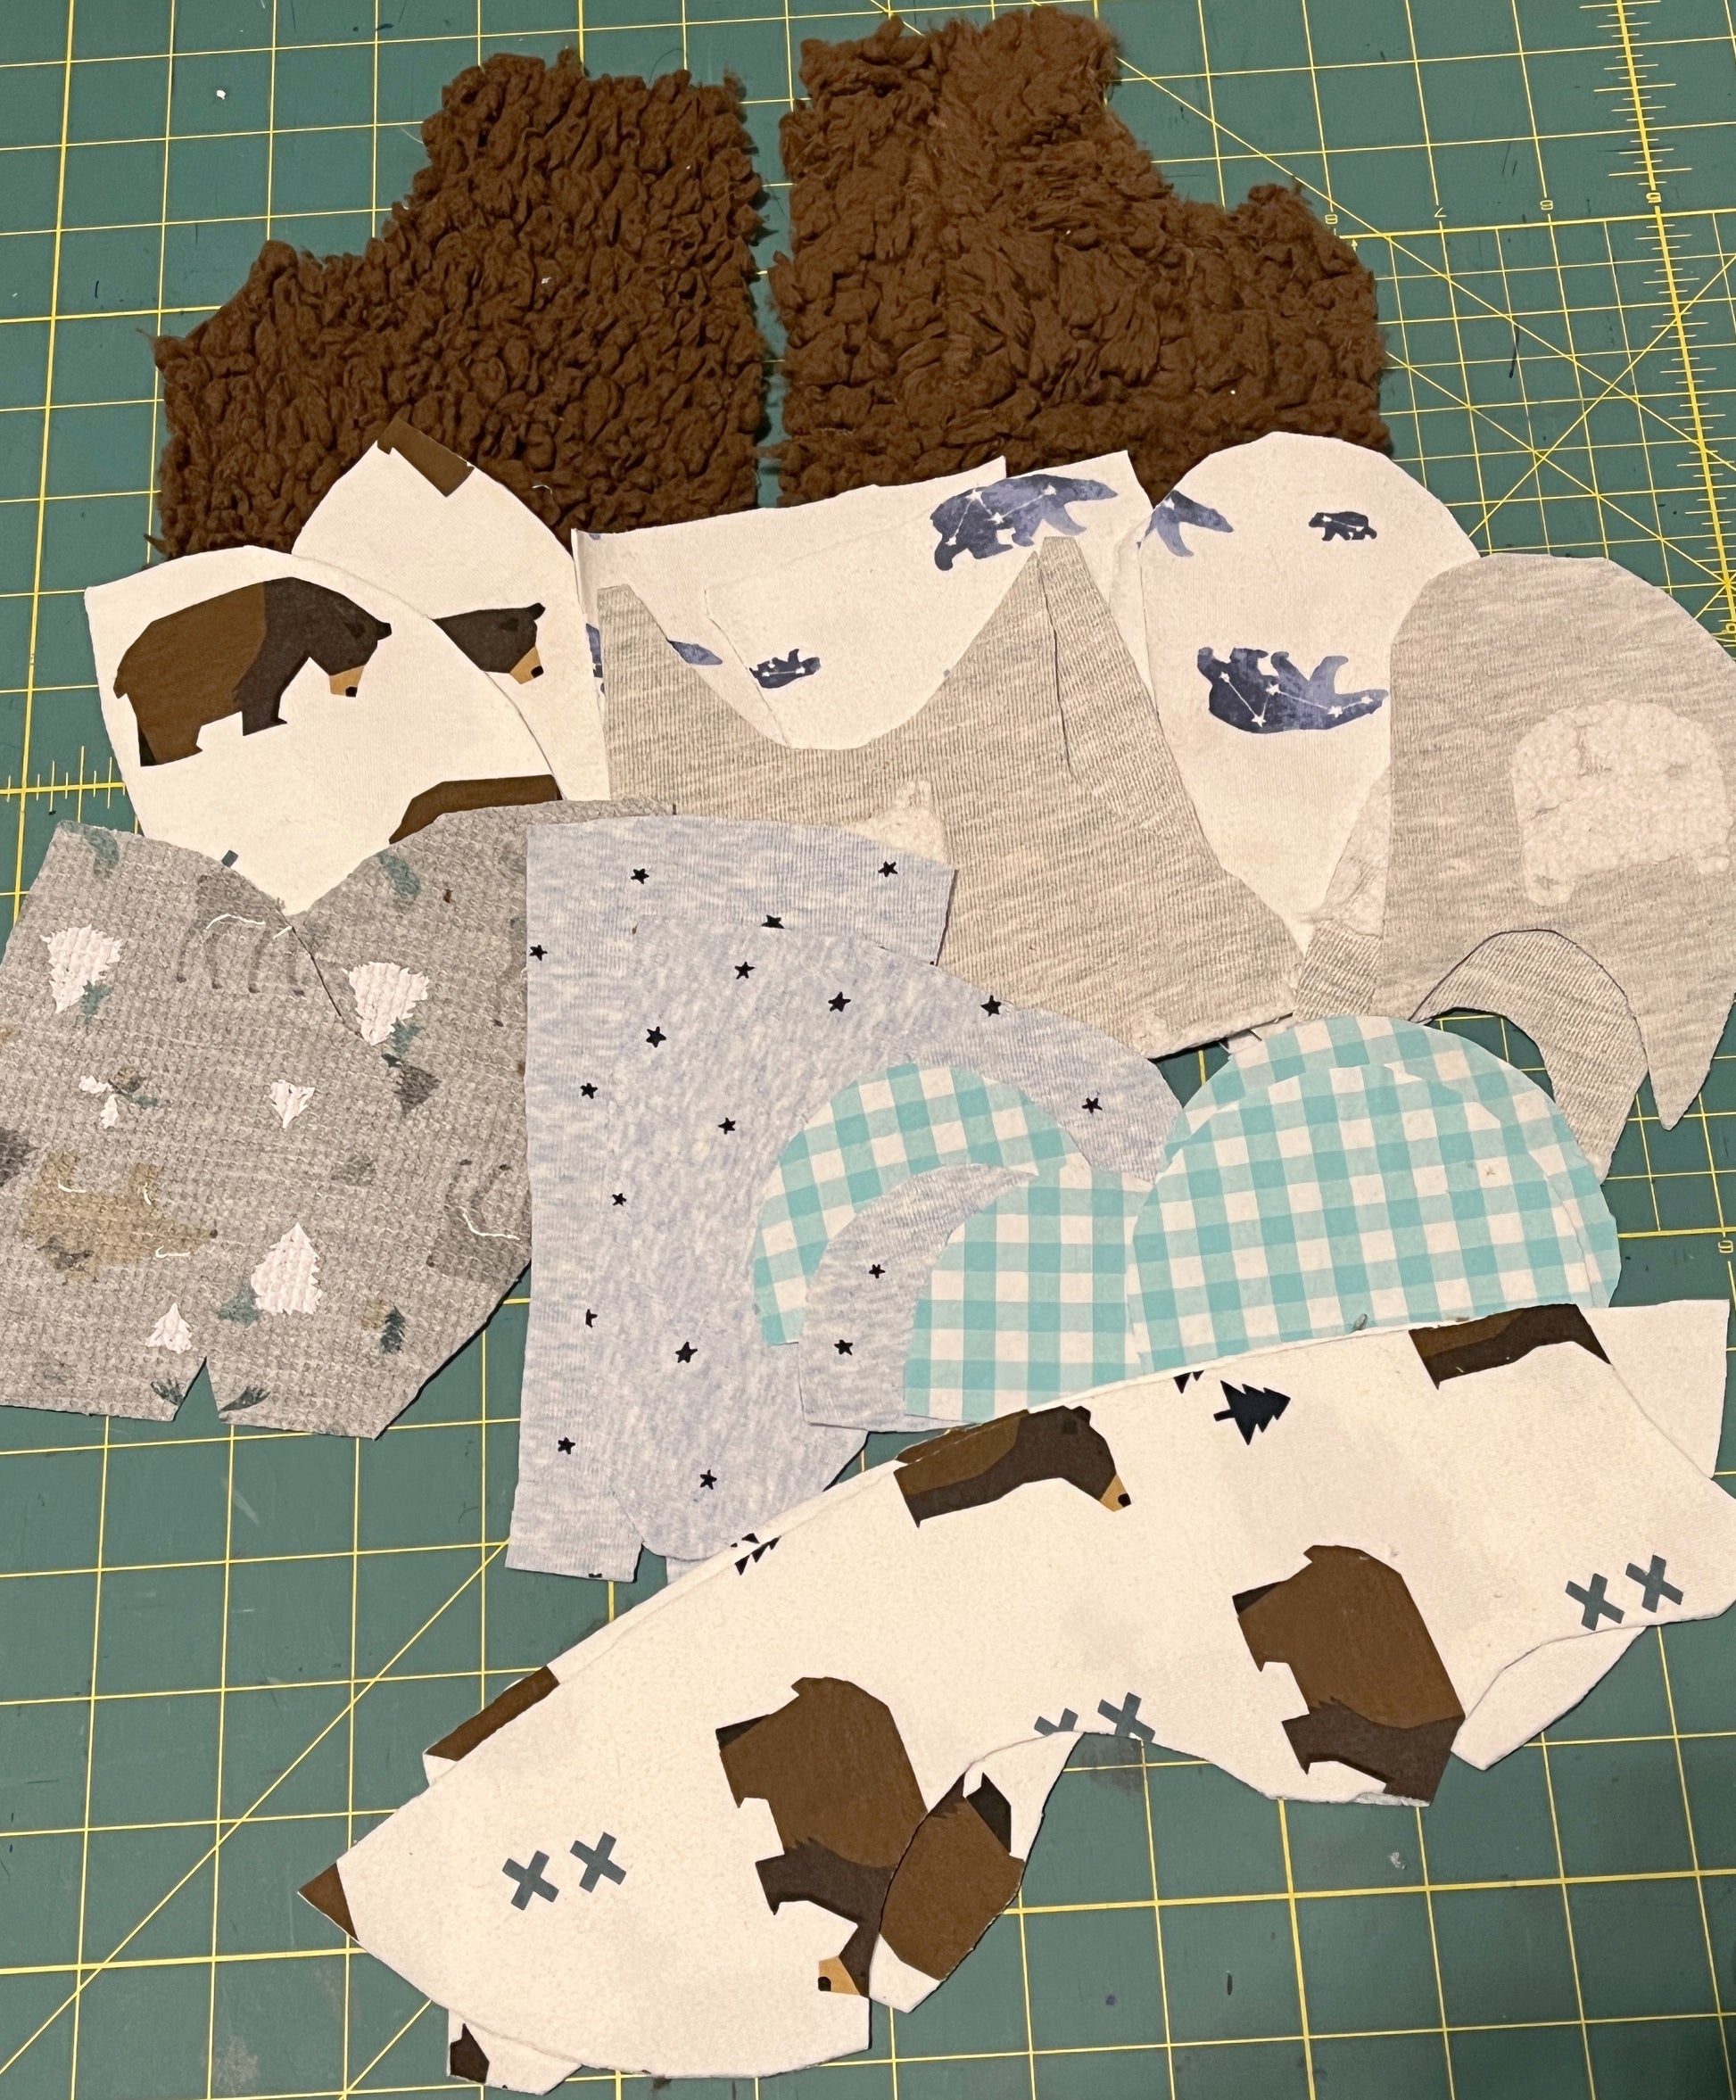 Cut out baby clothes pieces for the bear. Bear made with baby clothes, 12-13" size.